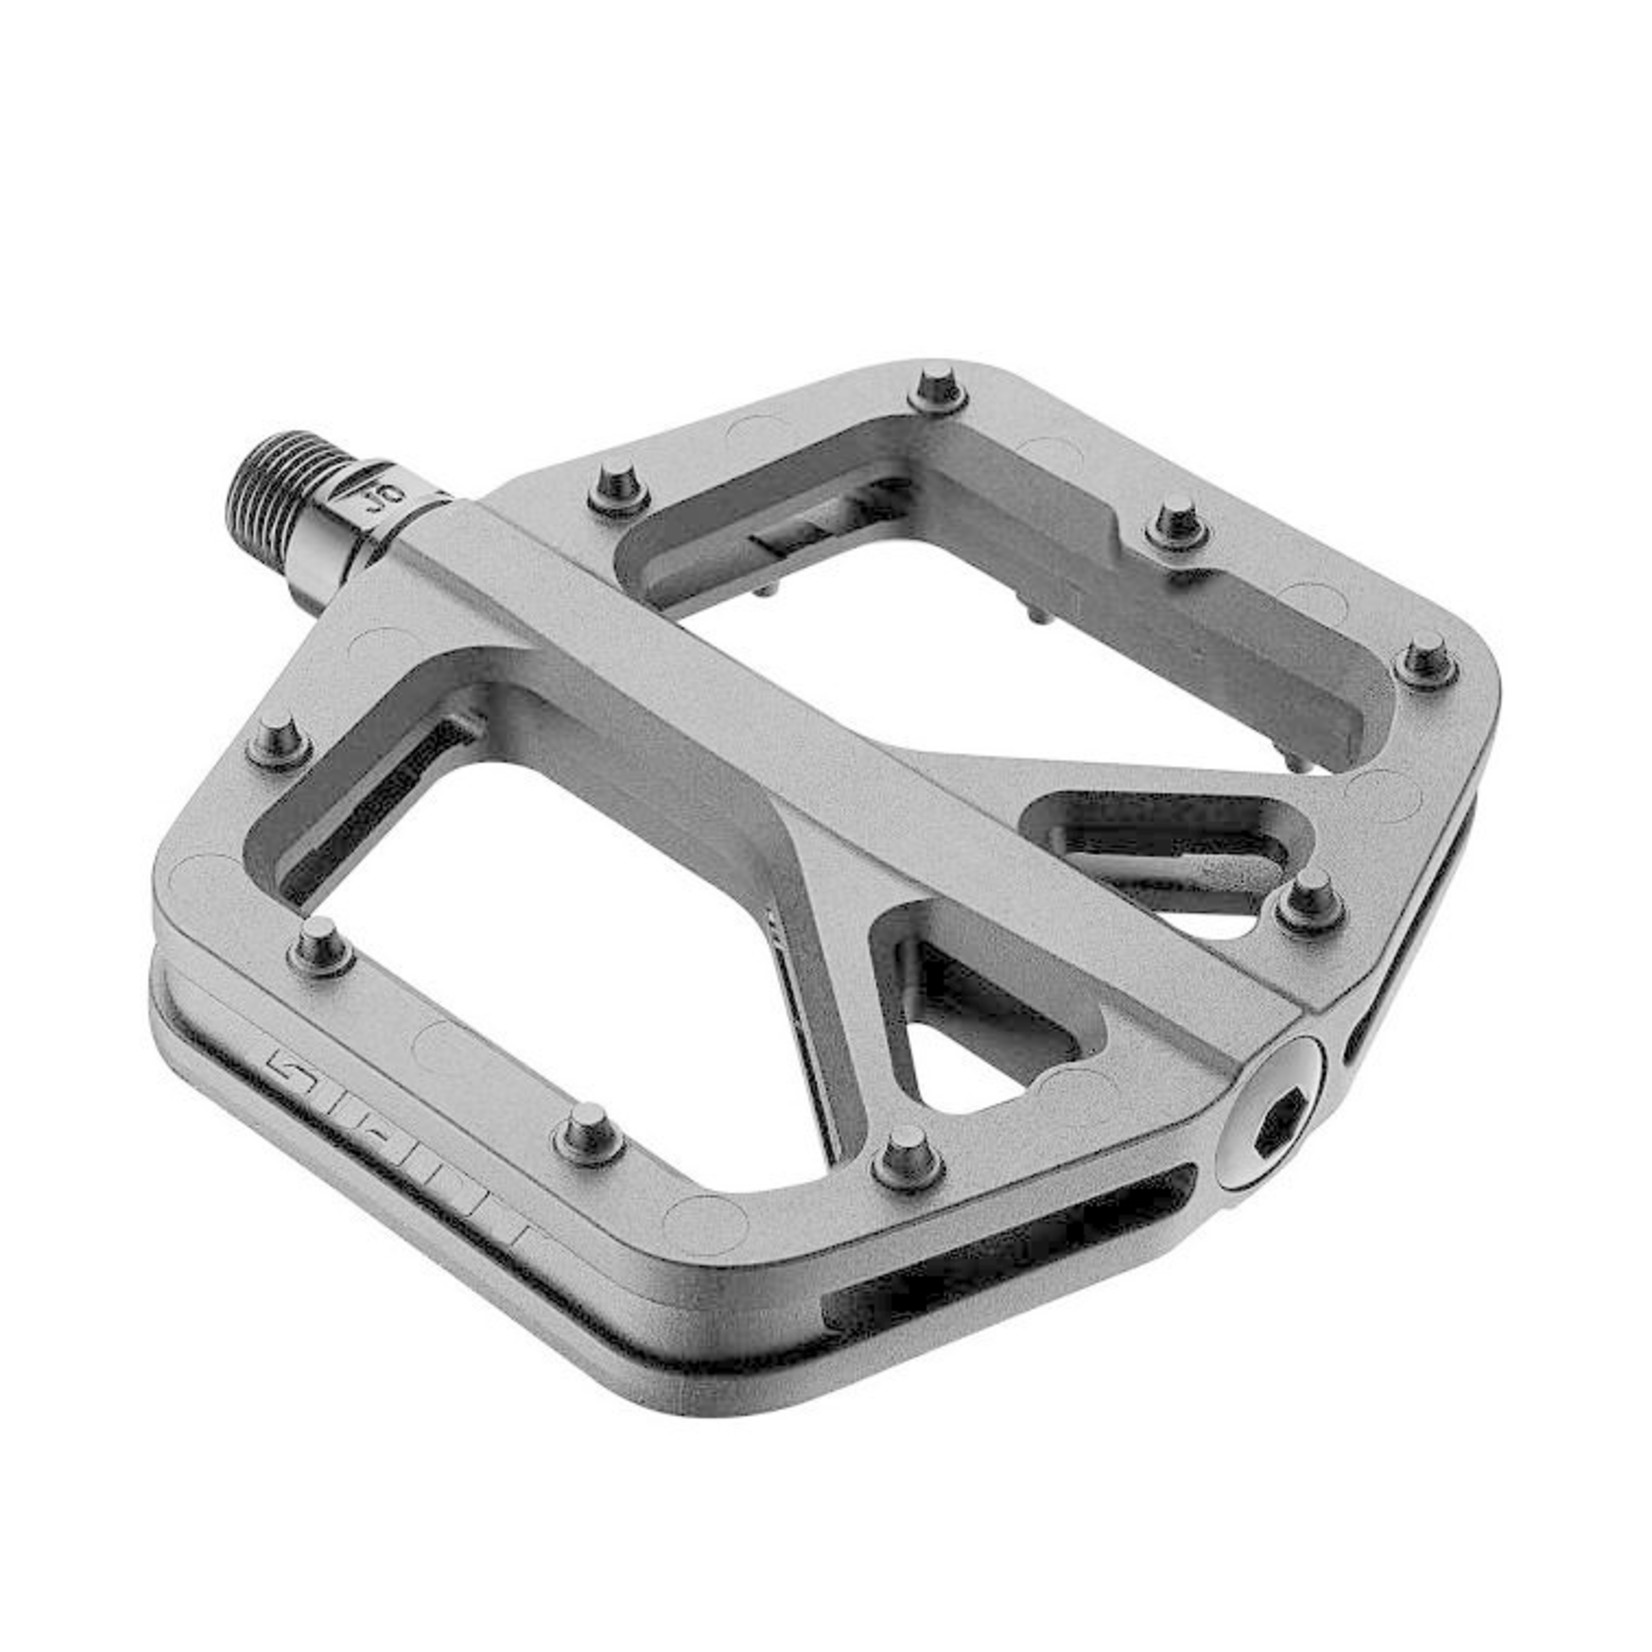 Giant Giant Pinner Comp Pedals Black